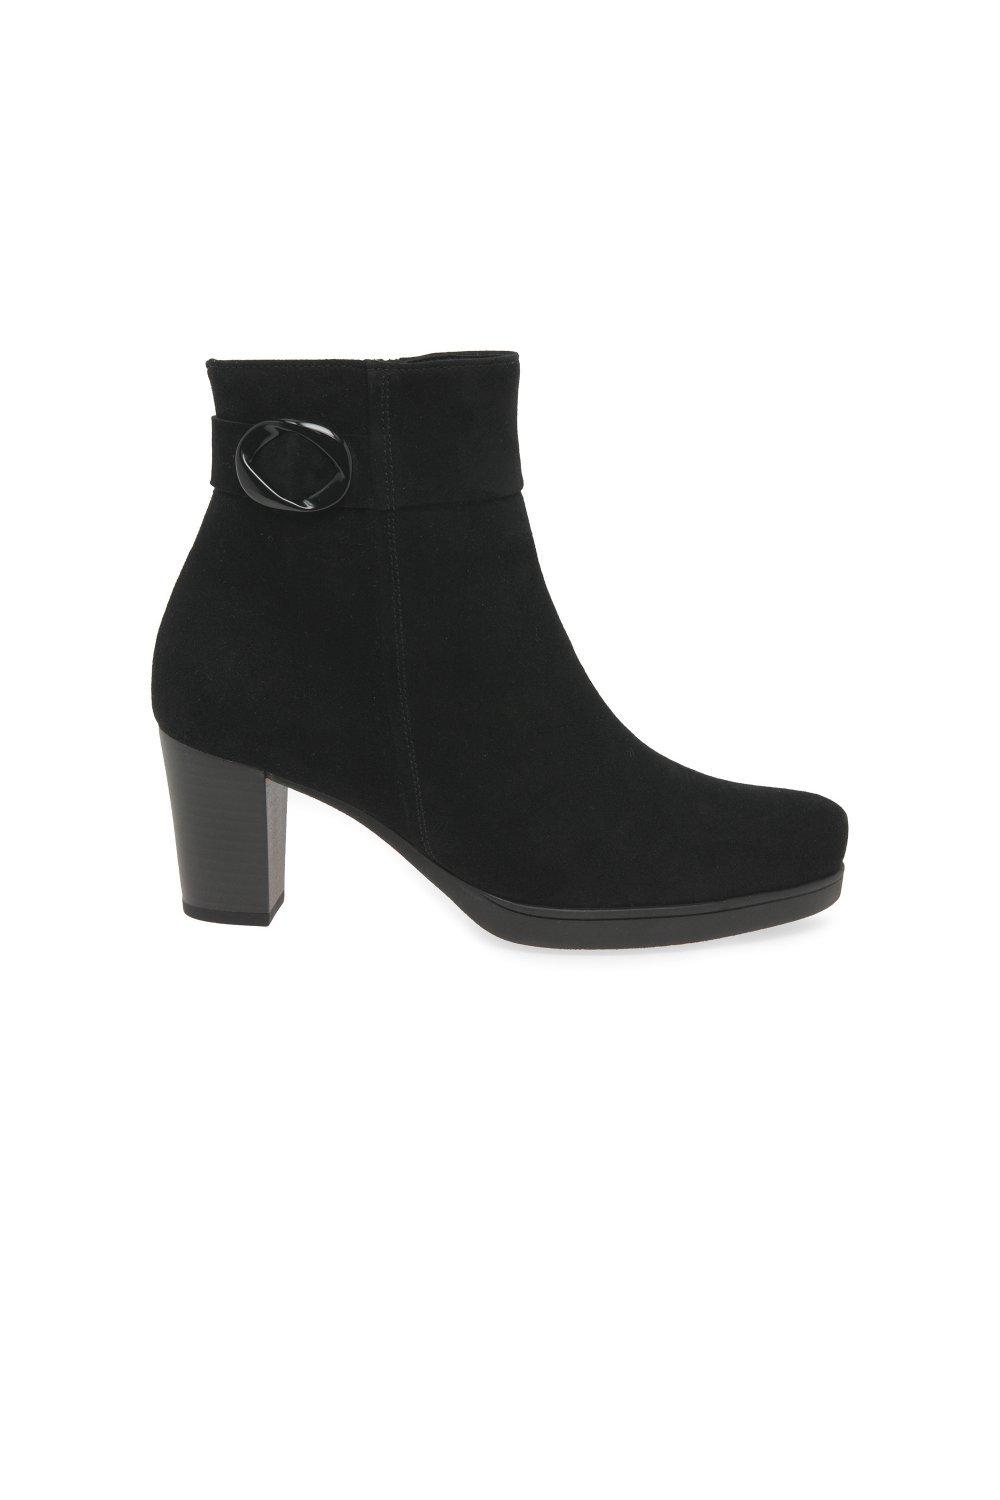 'Dove' Heeled Ankle Boots